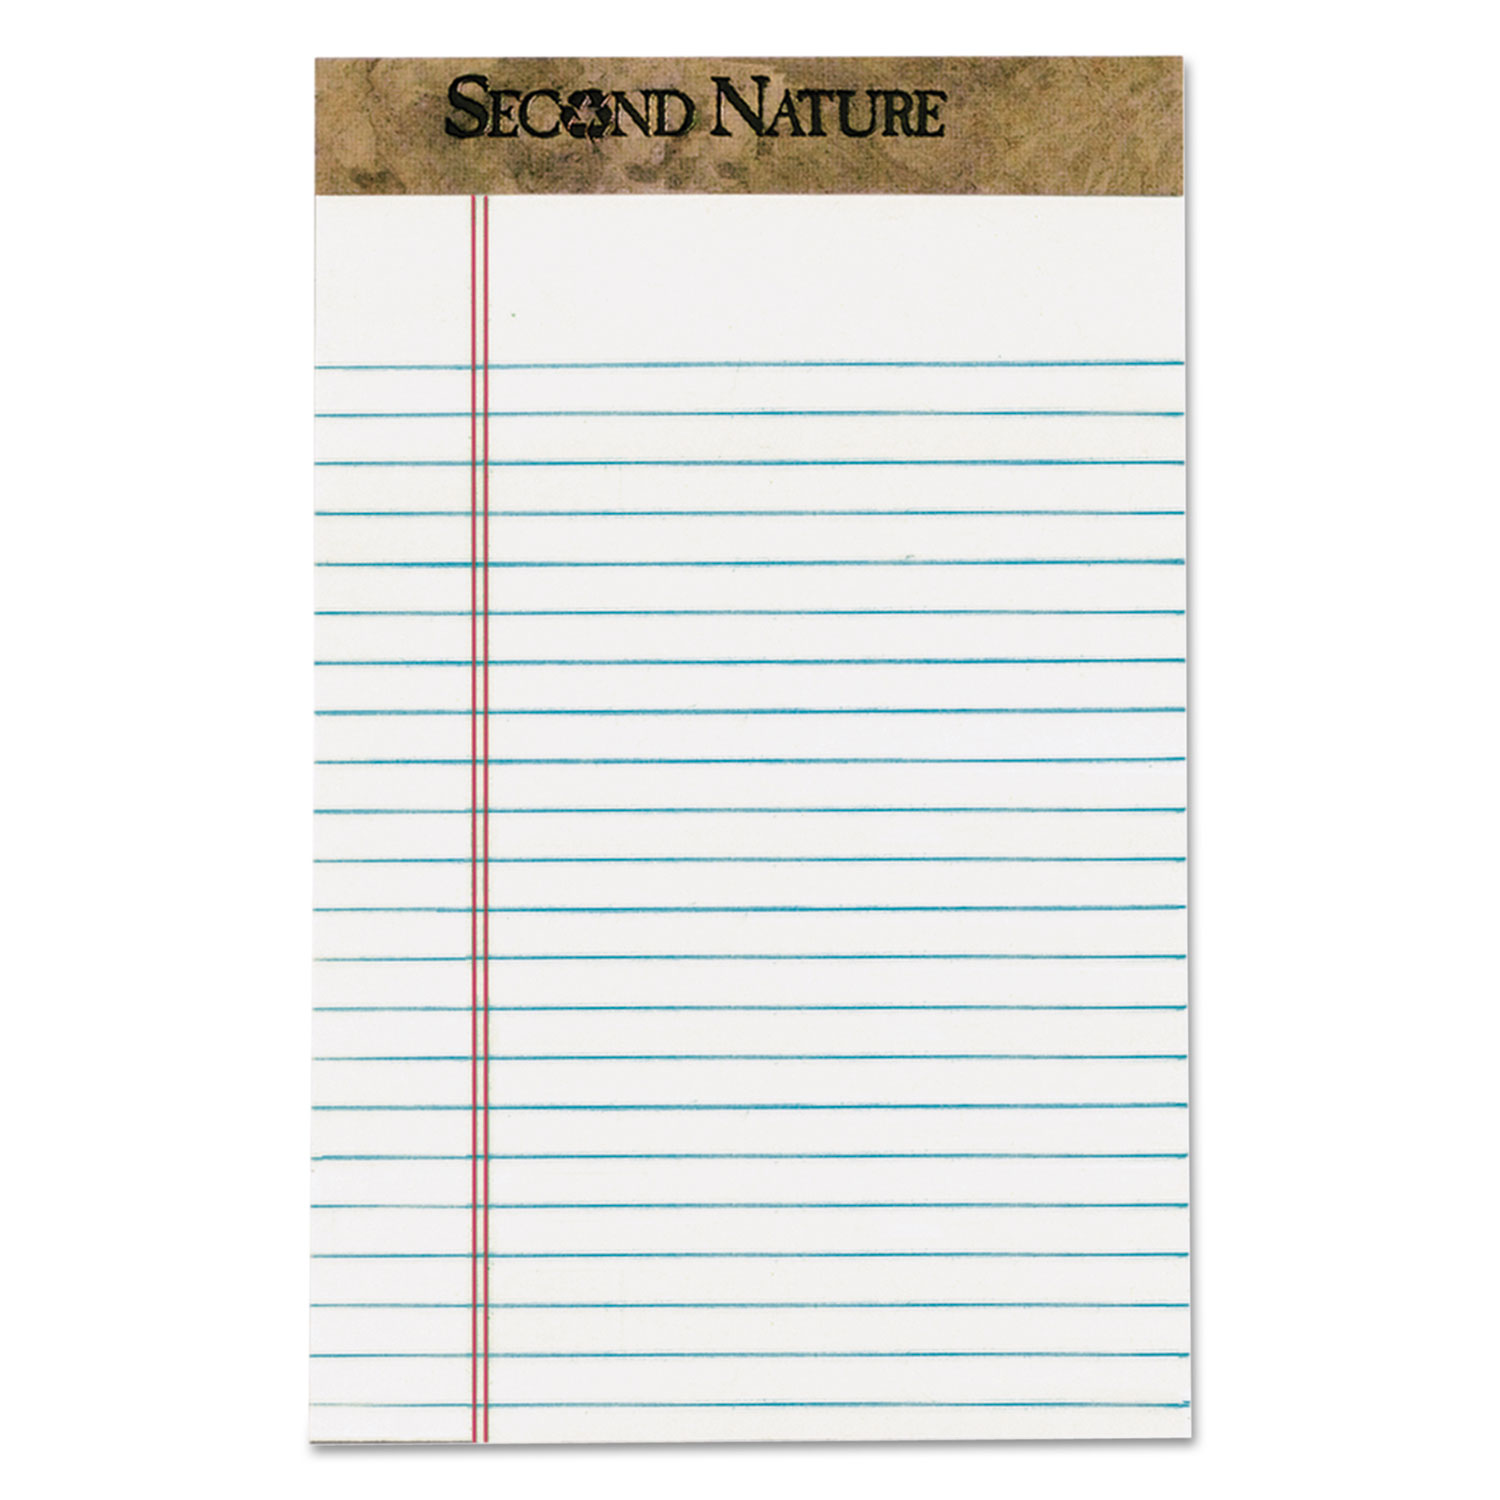 Second Nature Recycled Pads, Lgl Rule/Red Margin, 5 x 8, WE, 50 Sheets, DZ